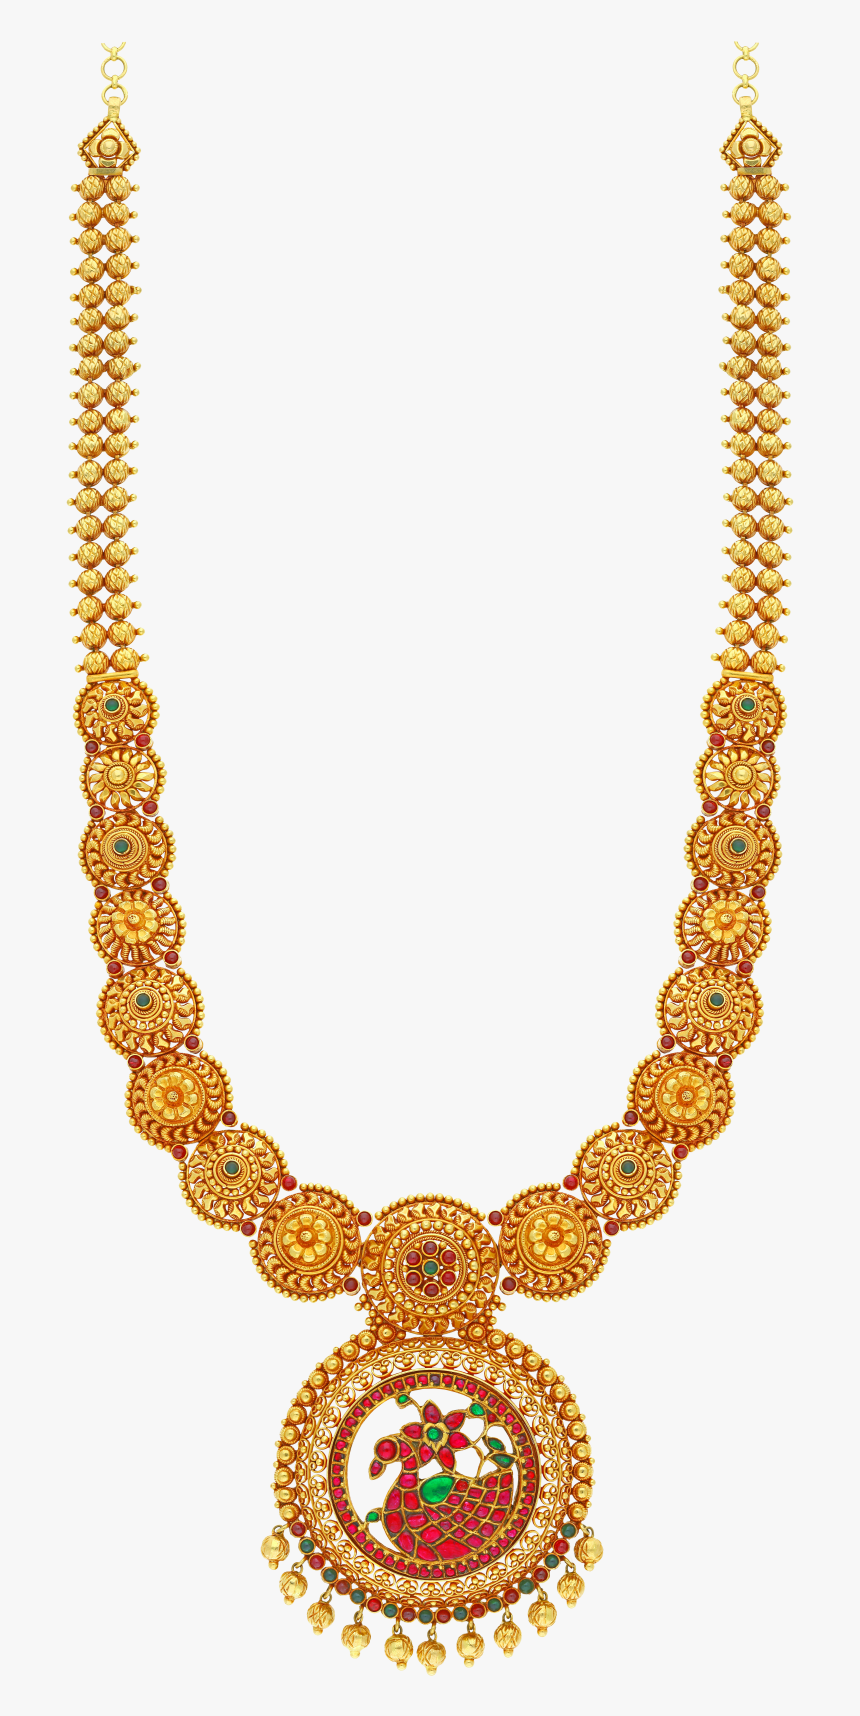 Necklace Nec193959 - Necklace, HD Png Download, Free Download